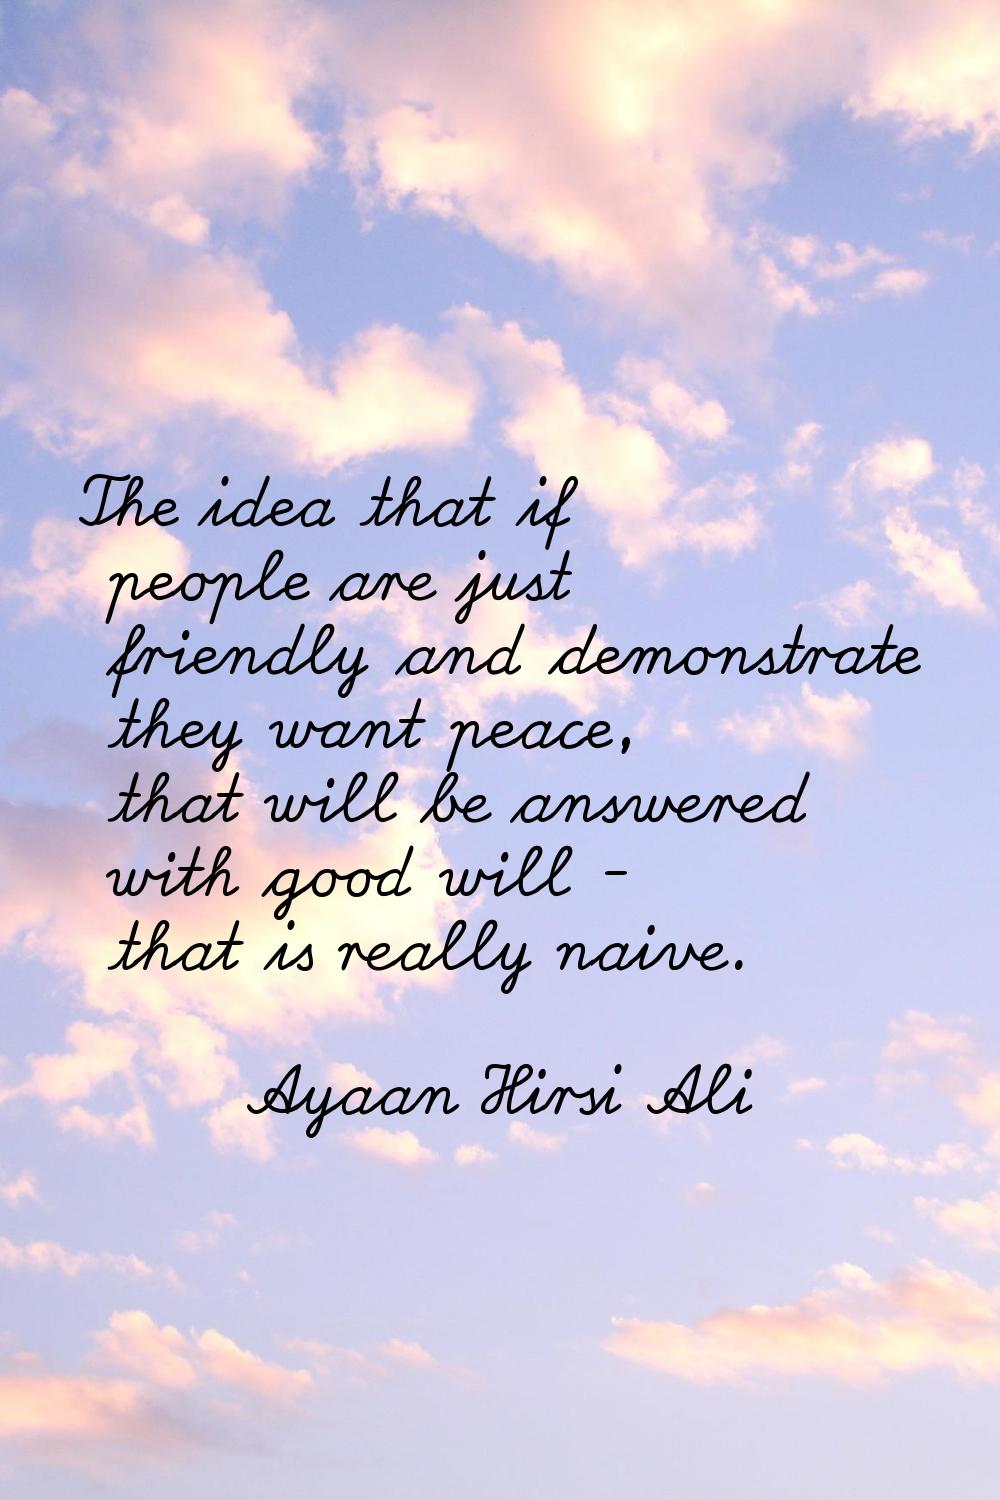 The idea that if people are just friendly and demonstrate they want peace, that will be answered wi